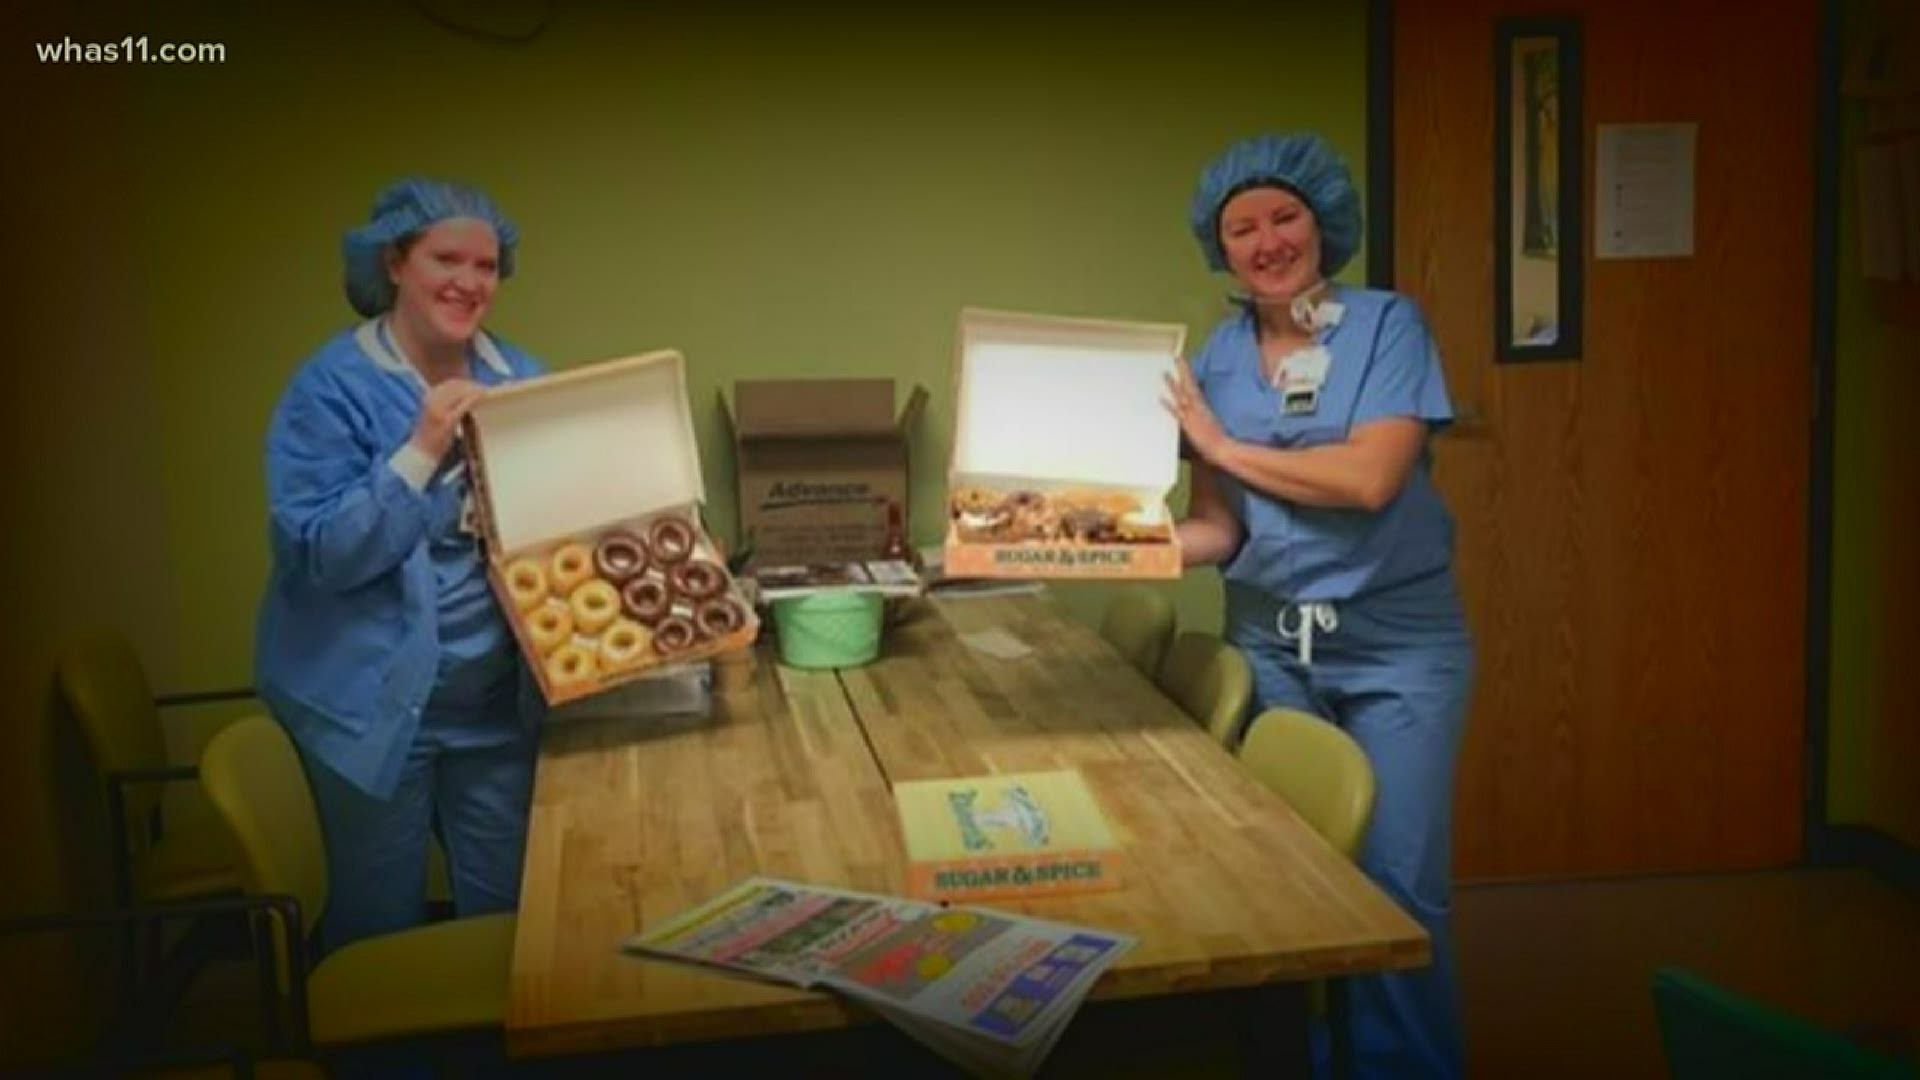 From boxes of doughnuts to salutes from the sky, communities across the state have come together to thank nurses for their work during the coronavirus pandemic.